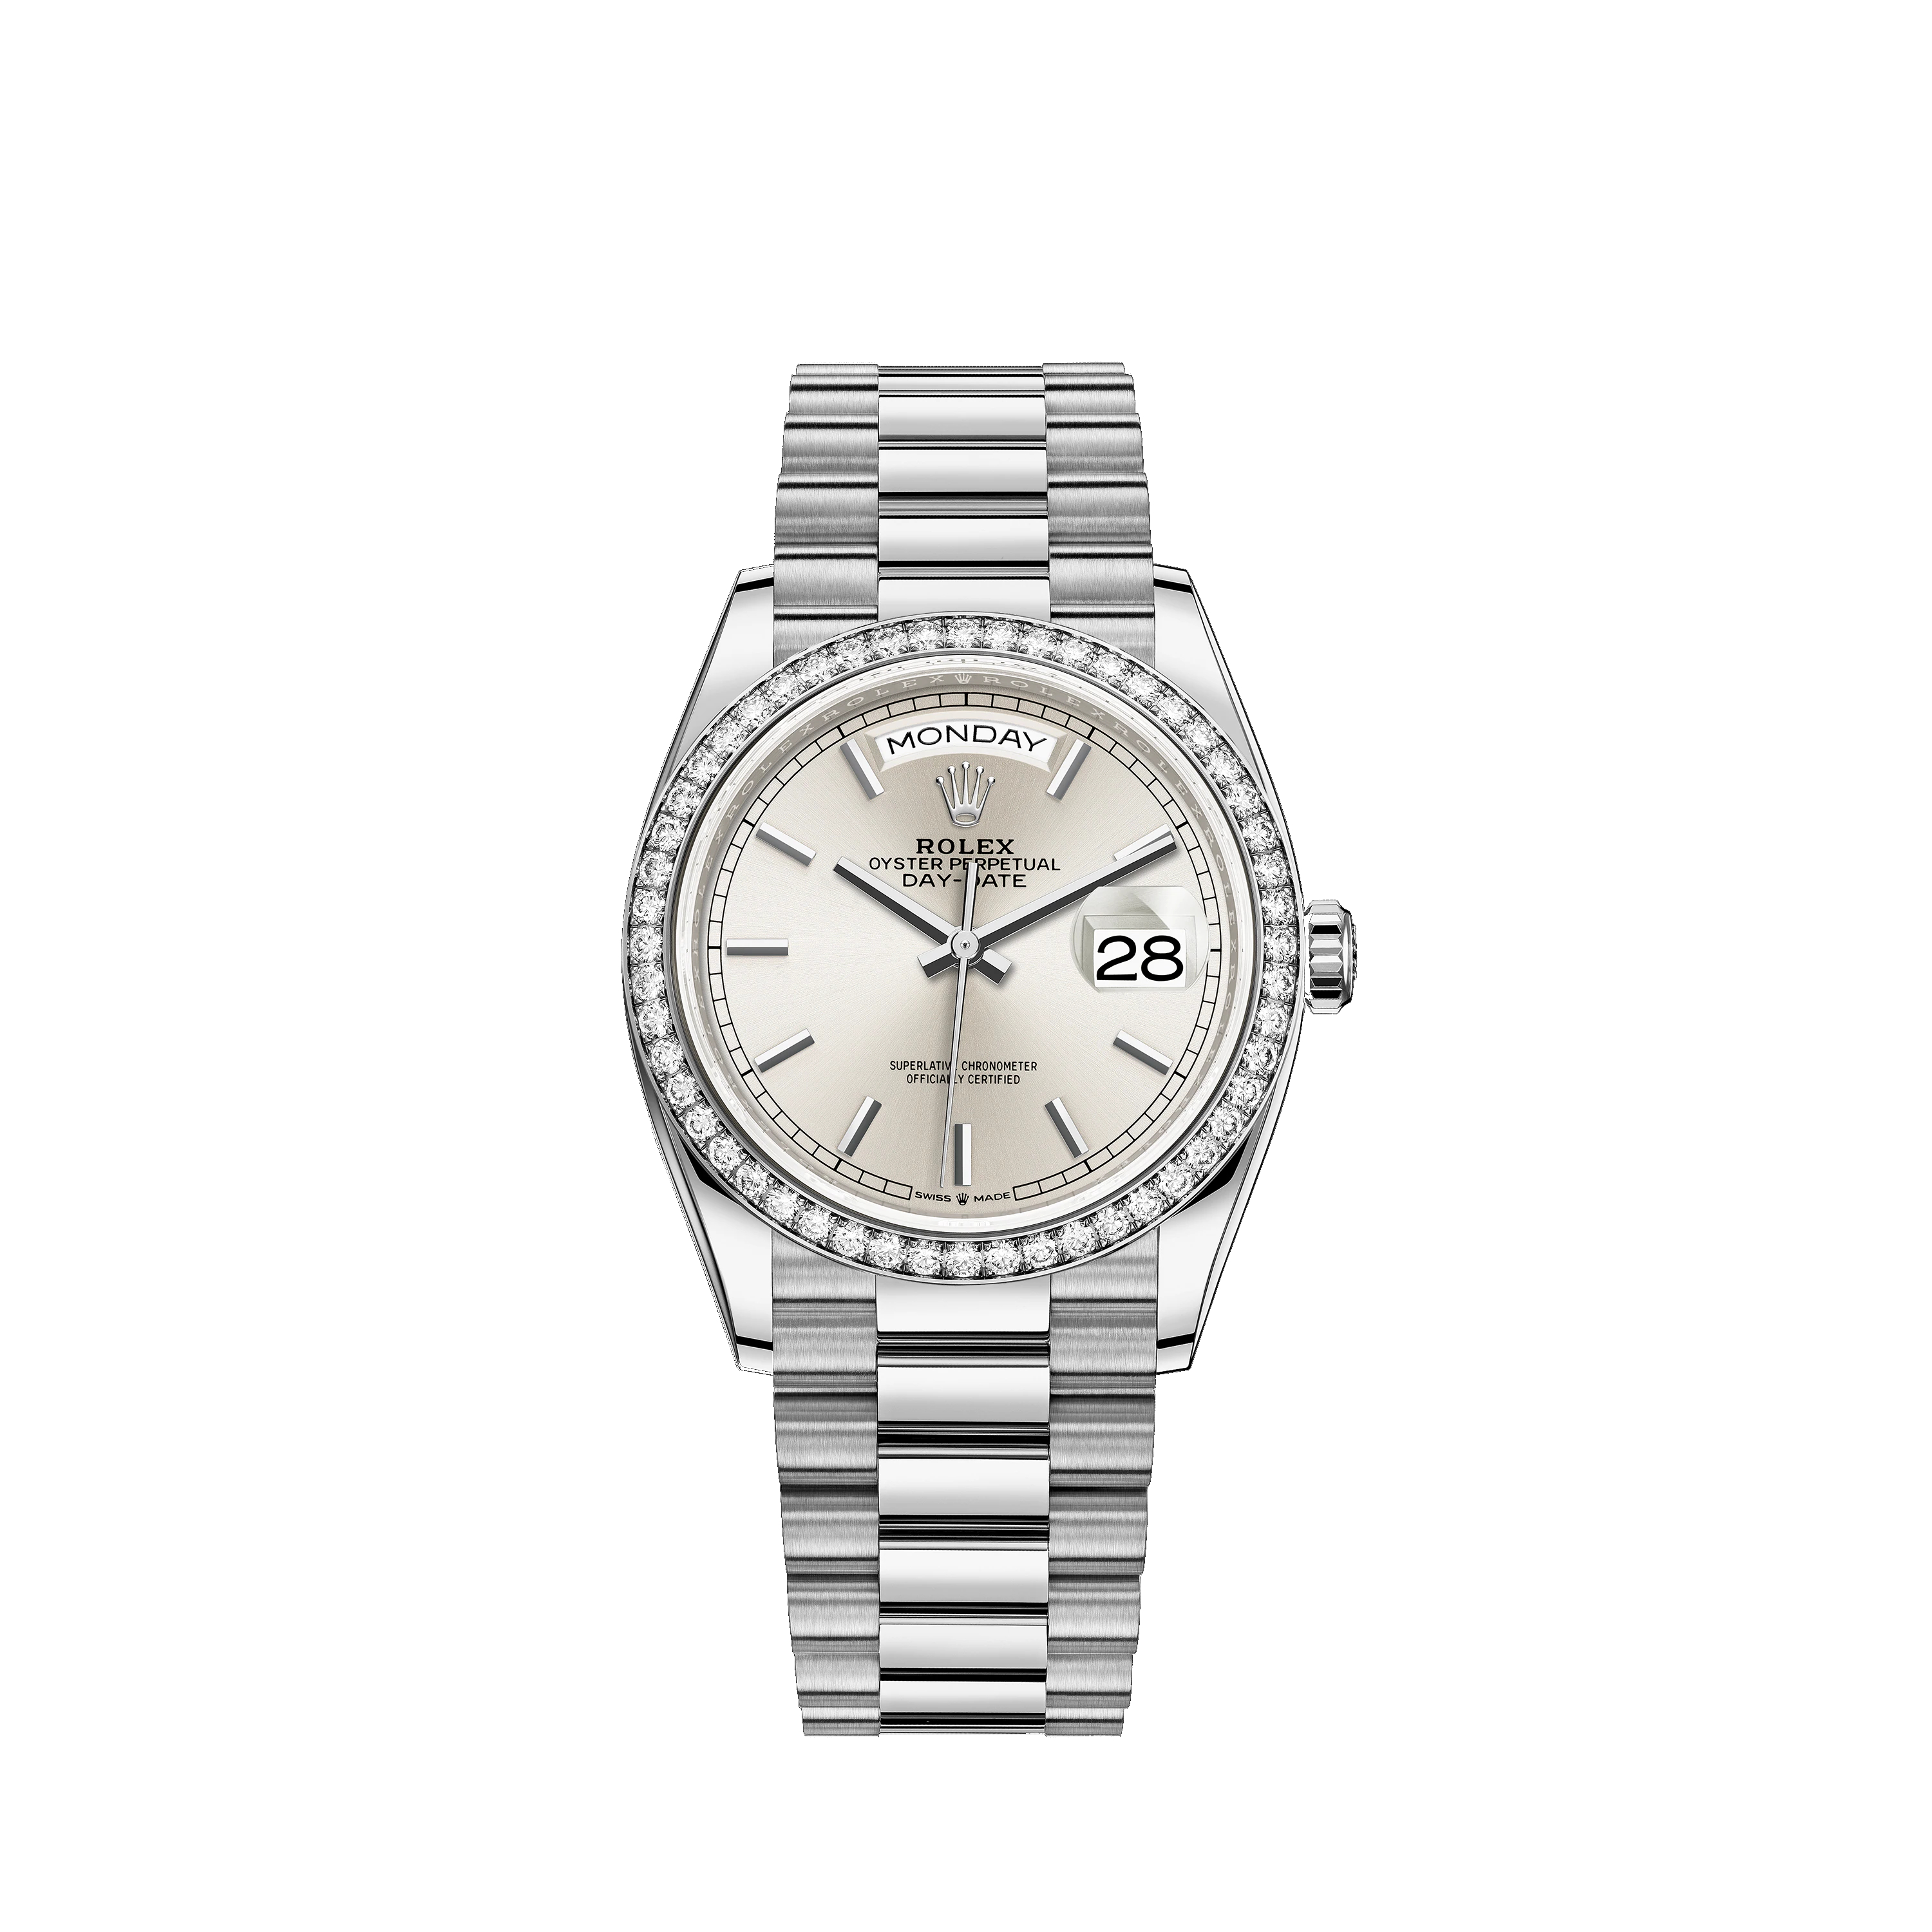 Day-Date 36 128349RBR White Gold & Diamonds Watch (Silver)